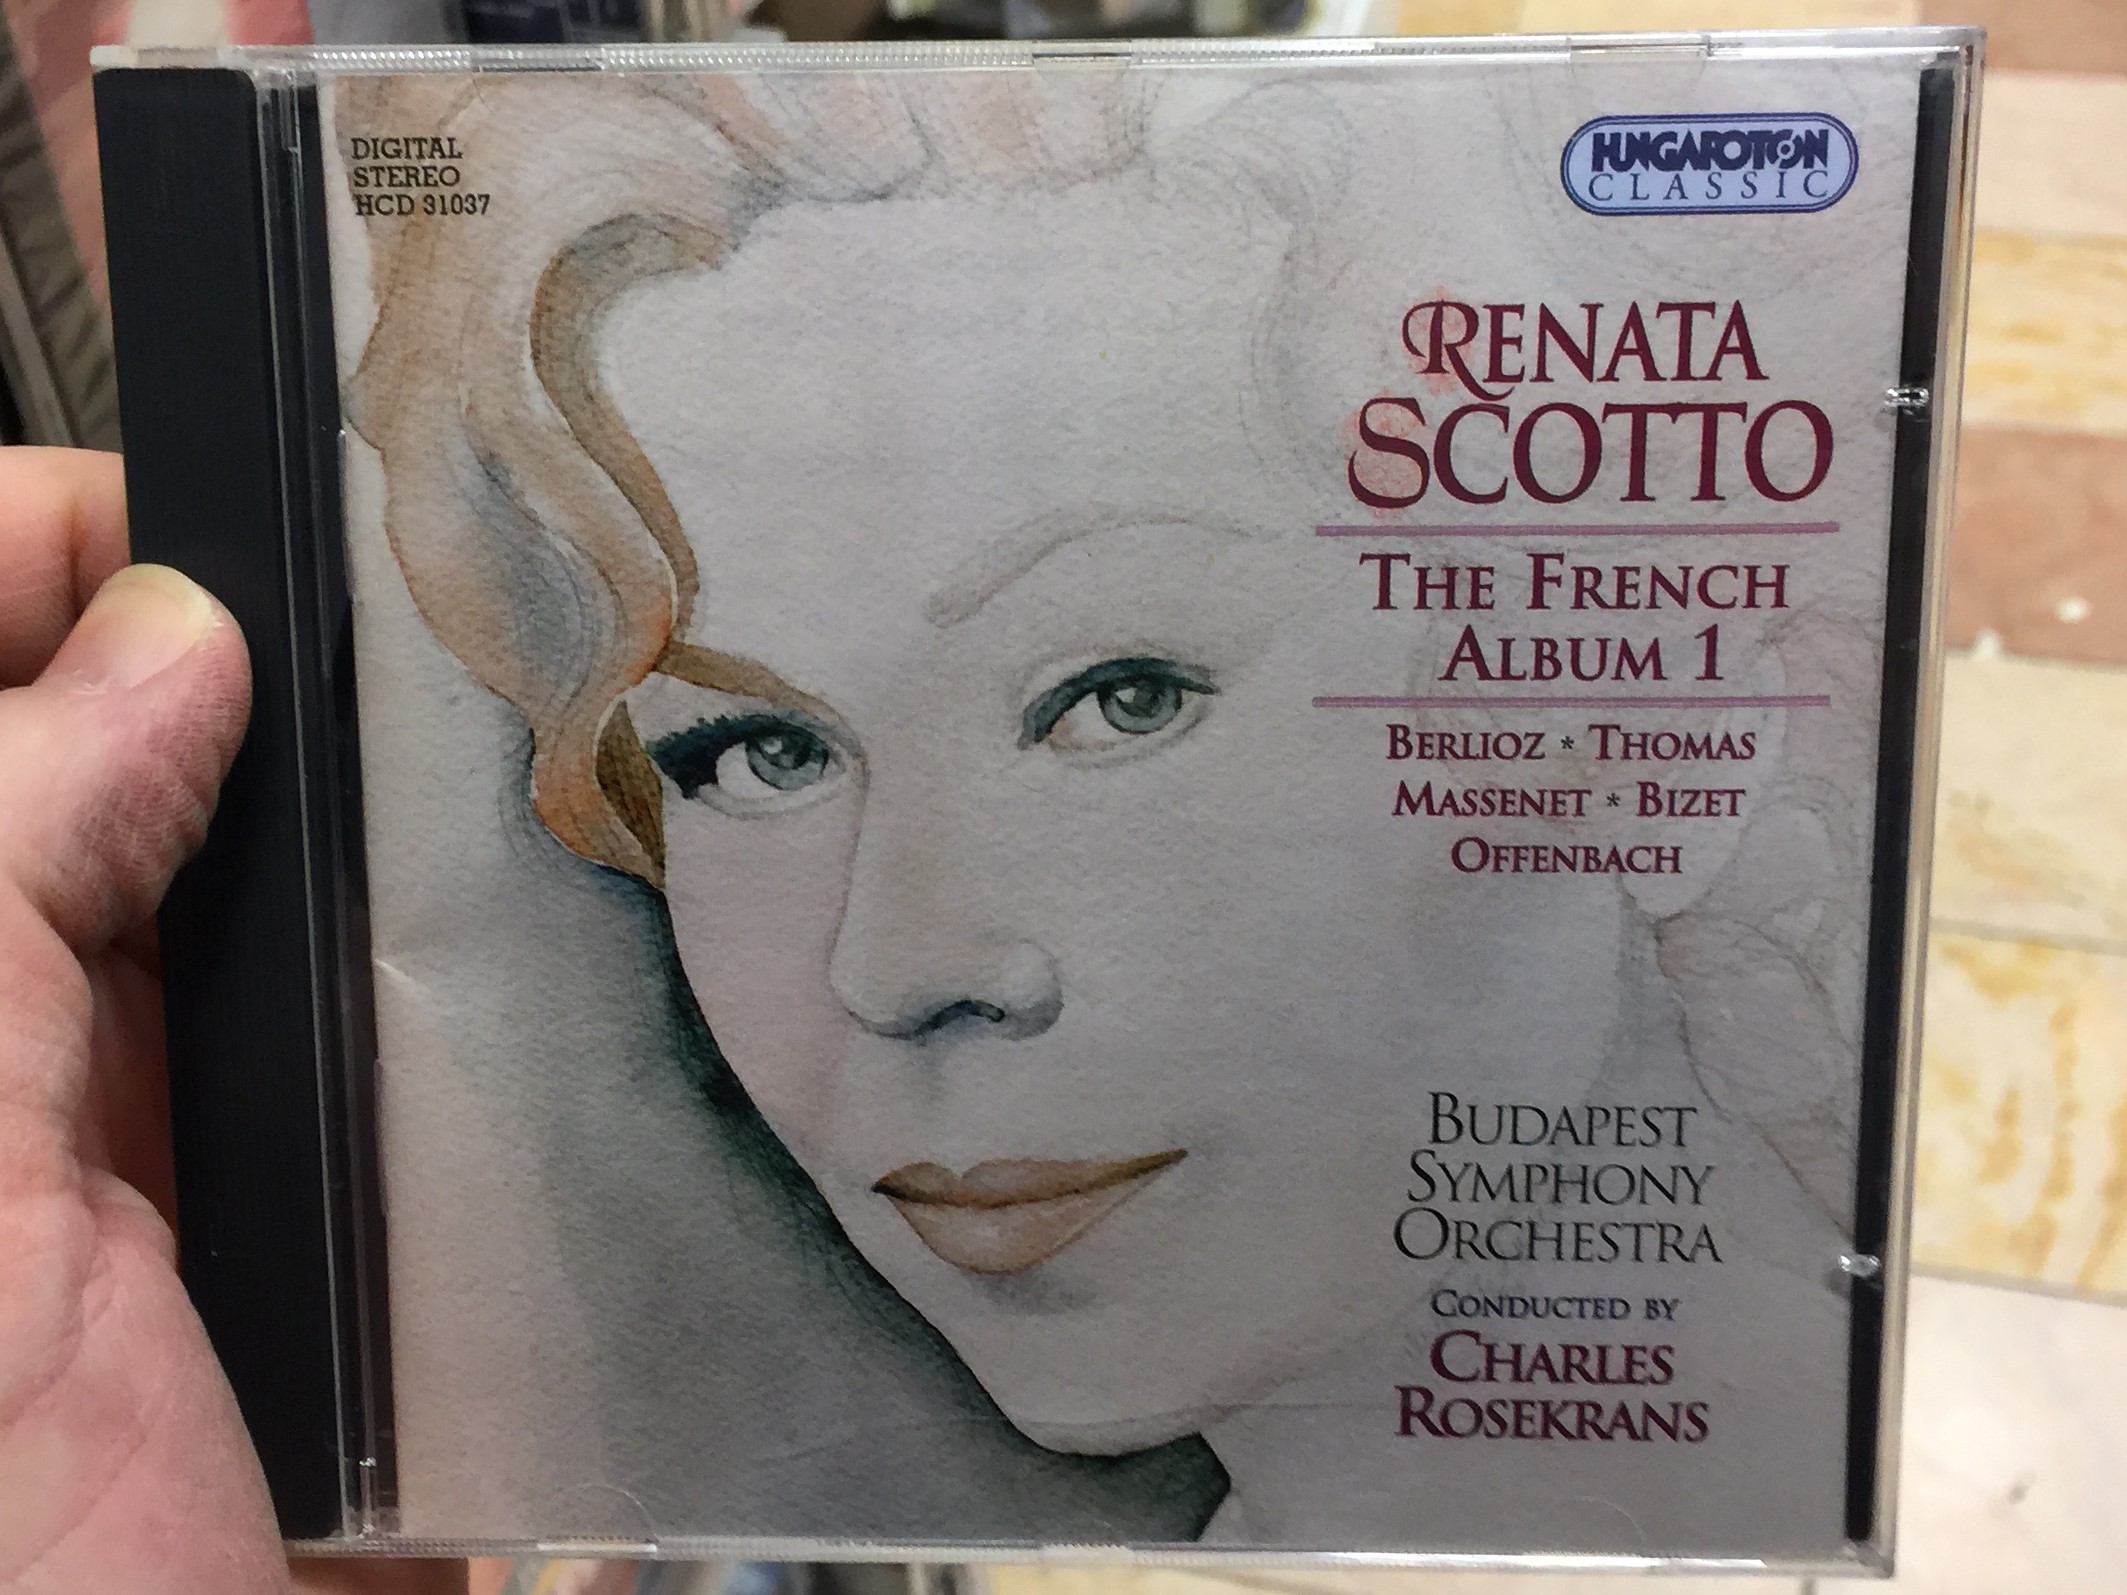 renata-scotto-the-french-album-1-berlioz-thomas-massenet-bizet-offenbach-budapest-symphony-orchestra-conducted-by-charles-rosekrans-hungaroton-classic-audio-cd-1988-stereo-hcd-31037-1-.jpg